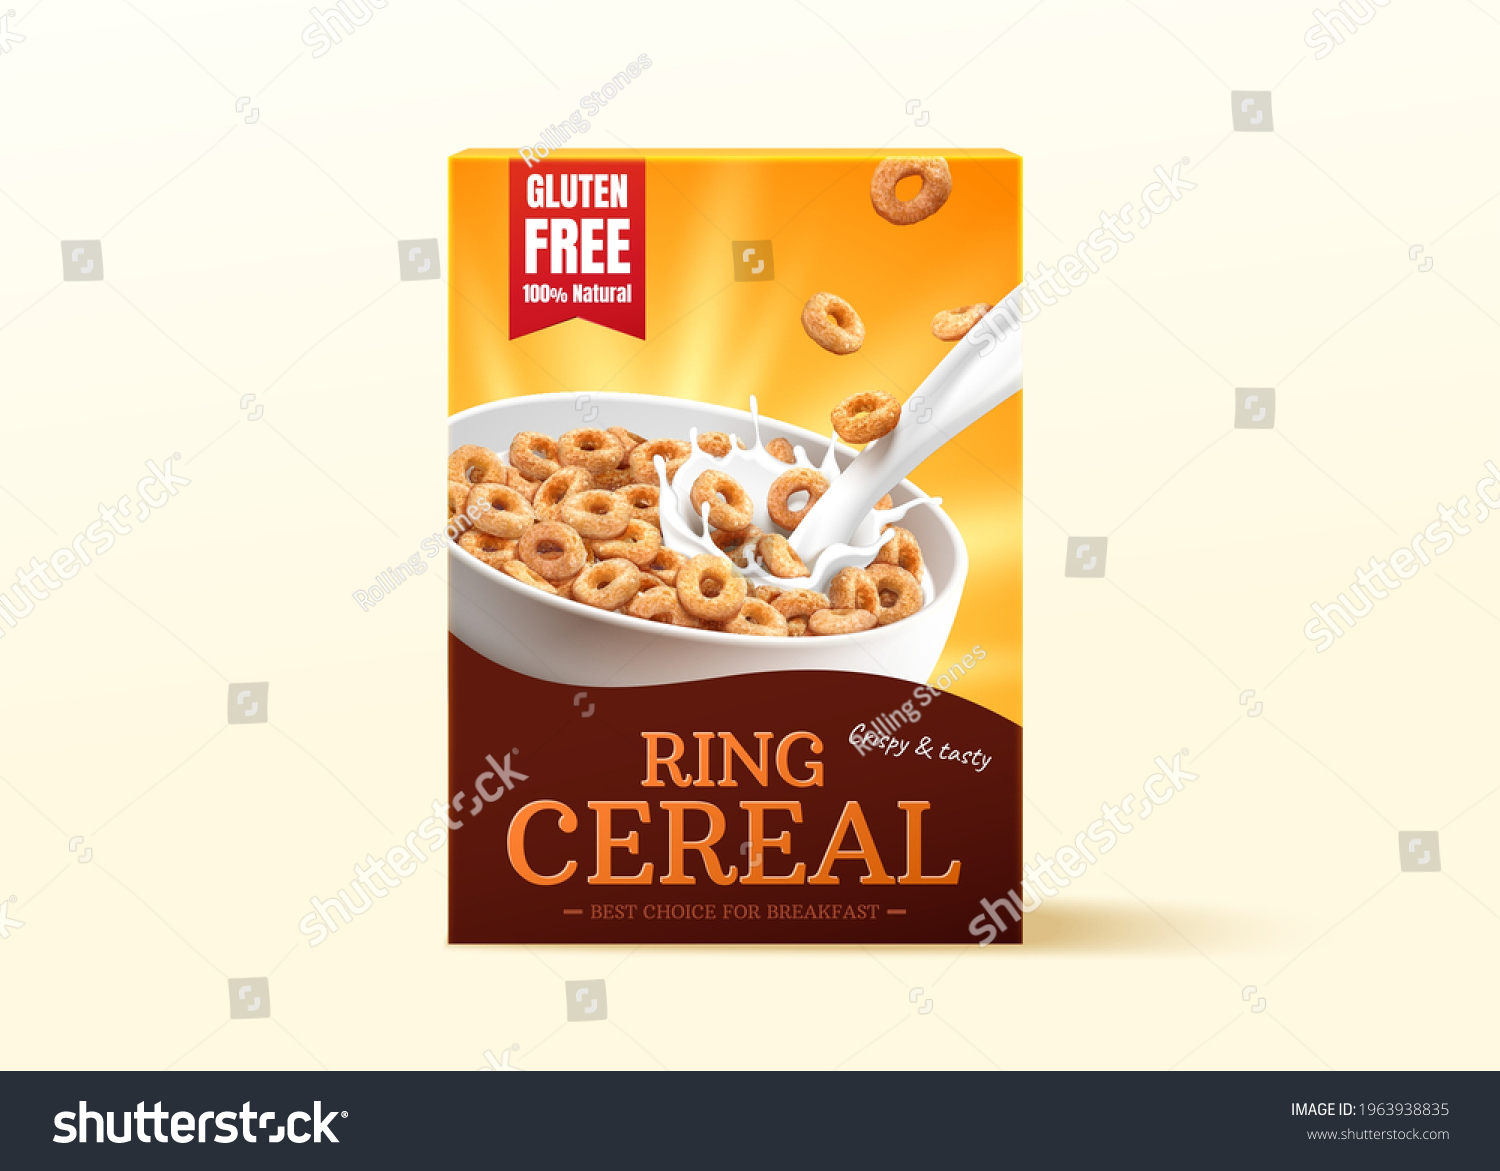 SVG of 3d realistic carton box package design for ring cereals or cheerios. Product mock up isolated on light yellow background. svg